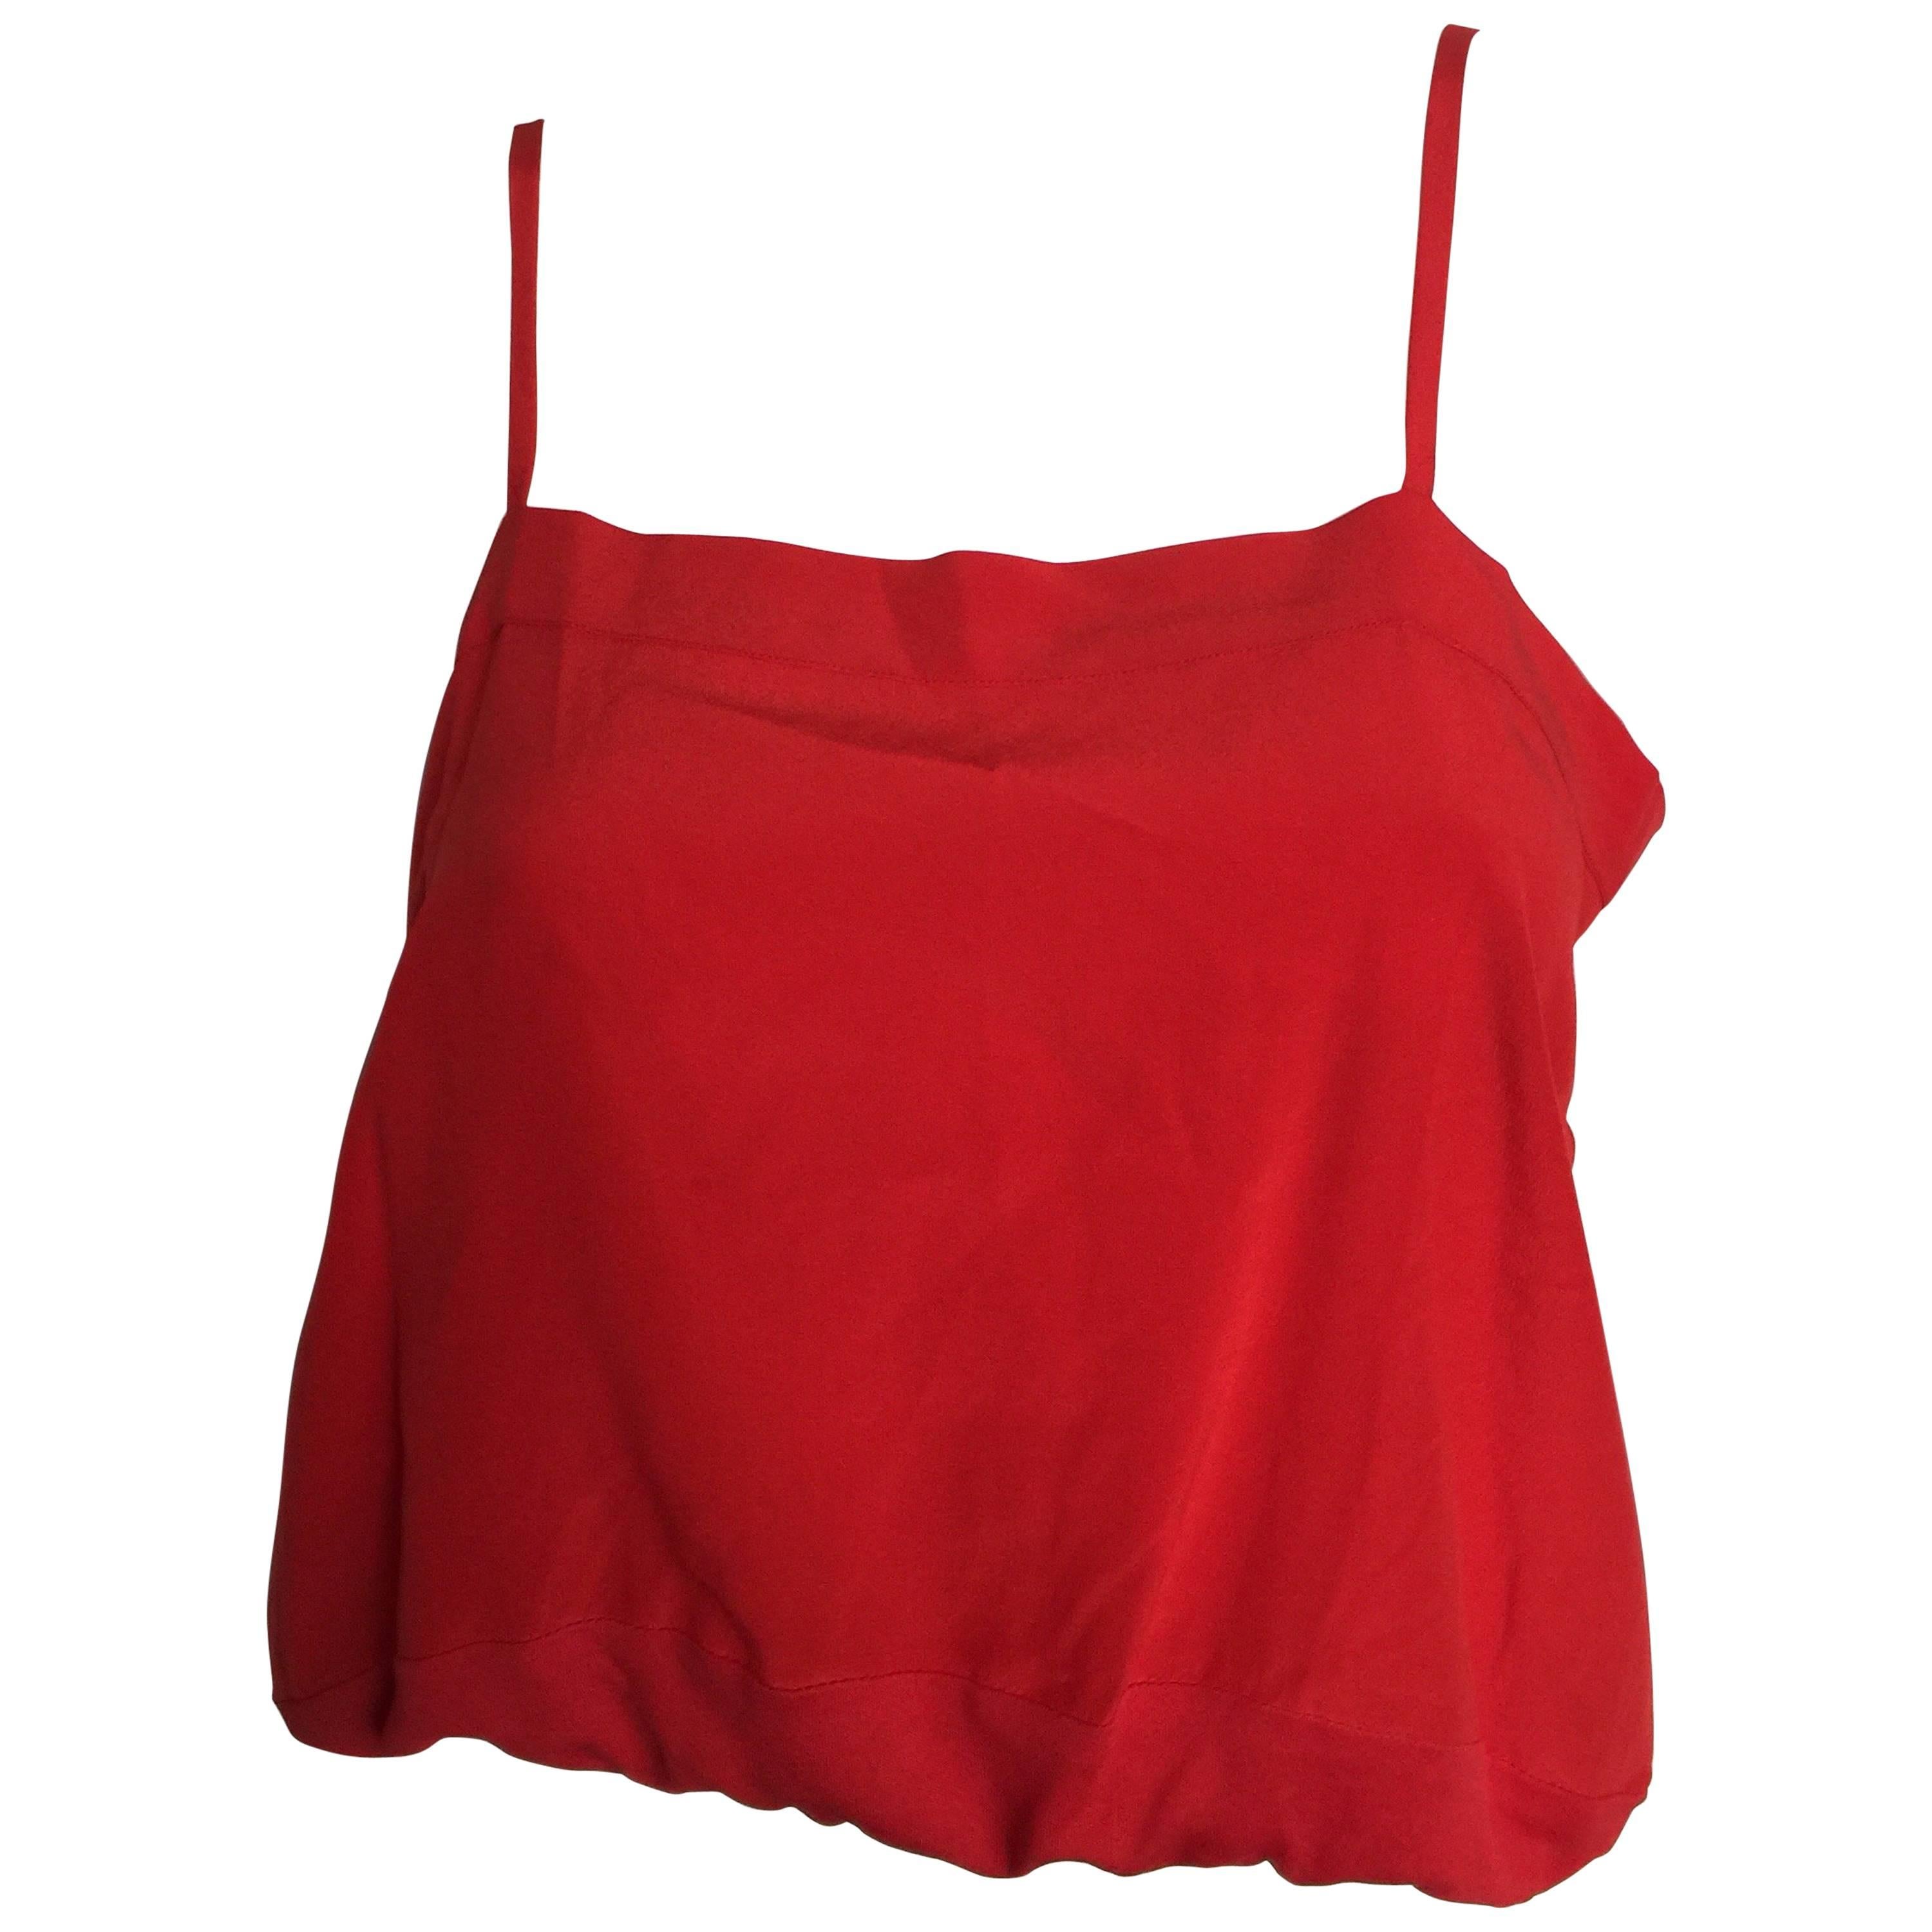 Chloe cherry red silk crop top For Sale